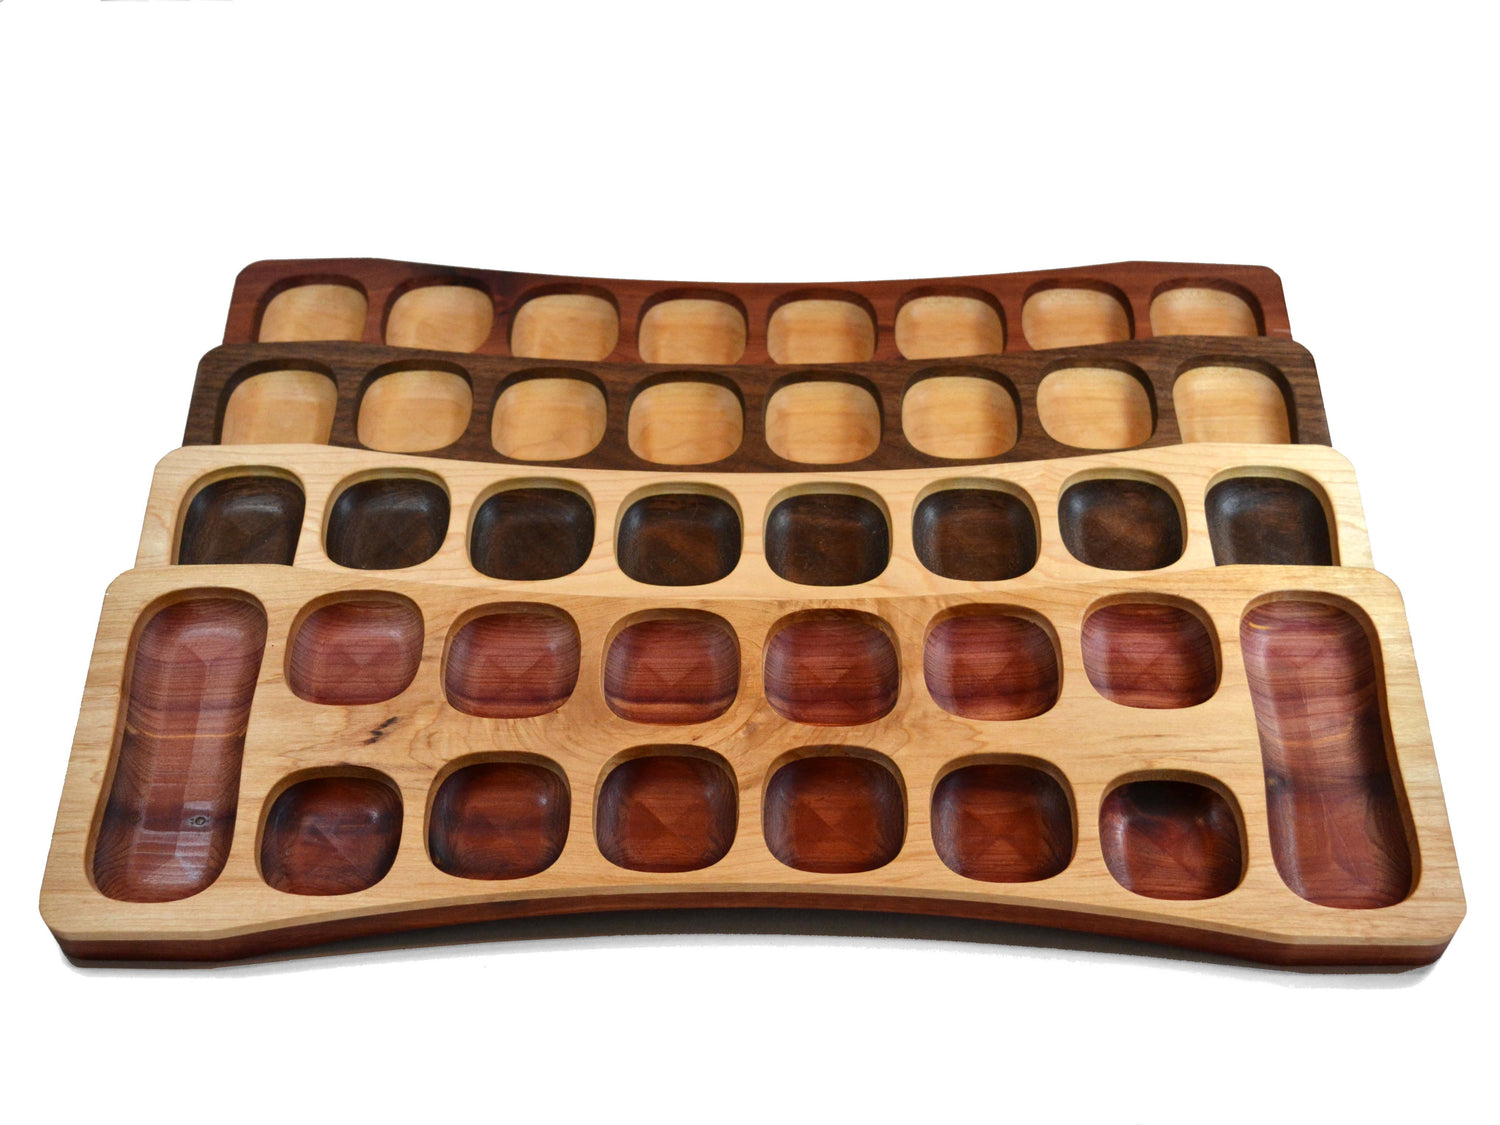 red, white, black wood mancala boards in assorted colors